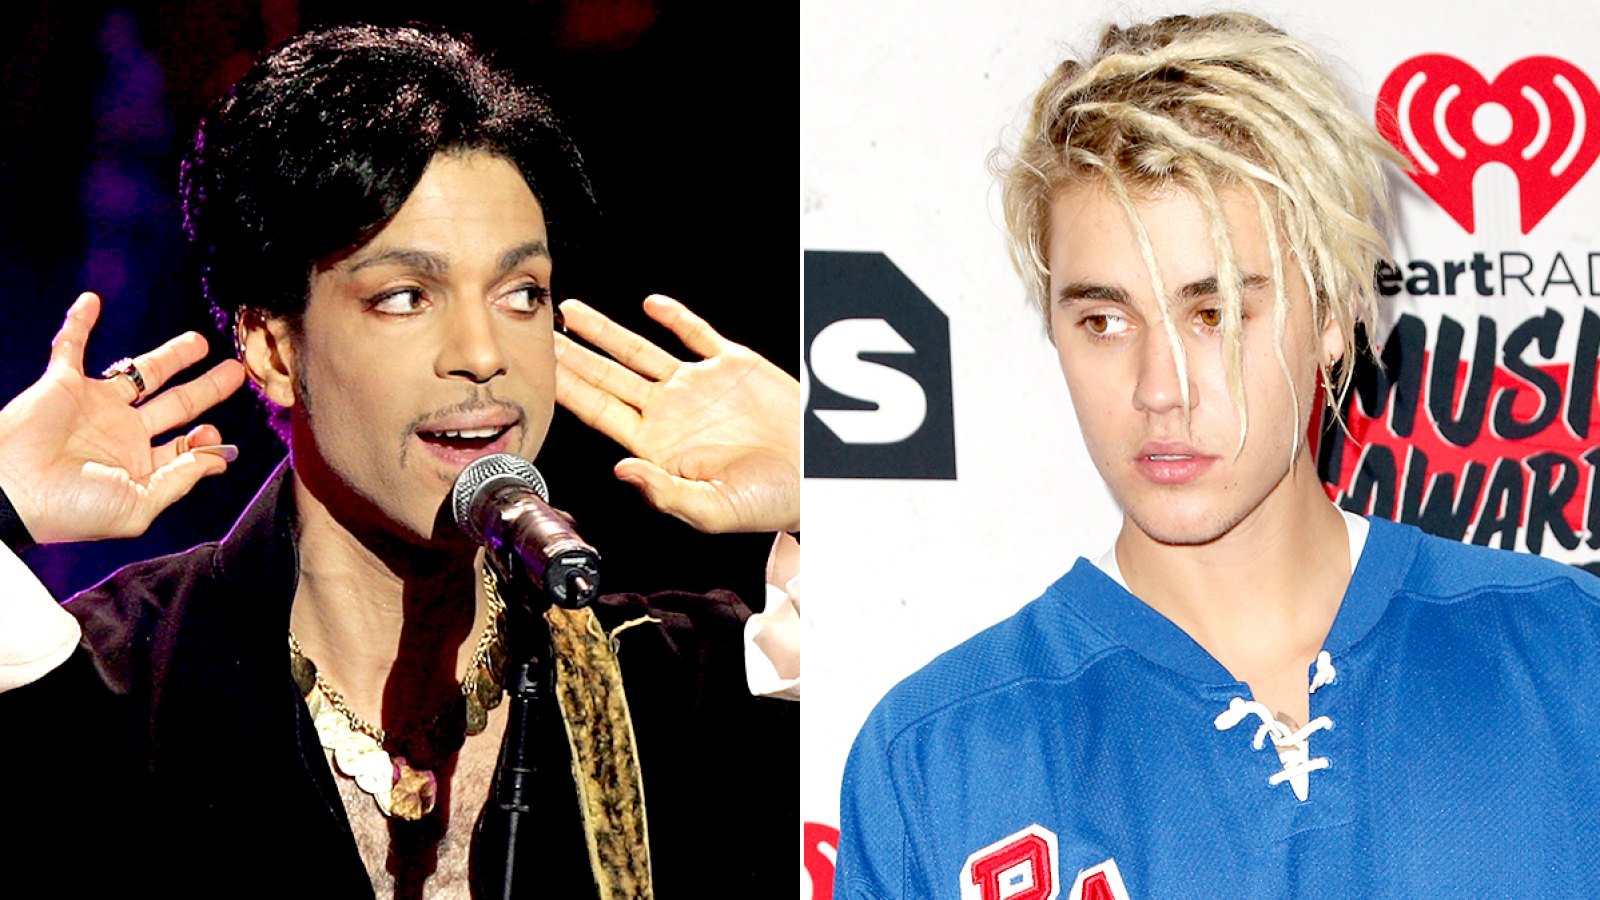 Prince and Justin Bieber